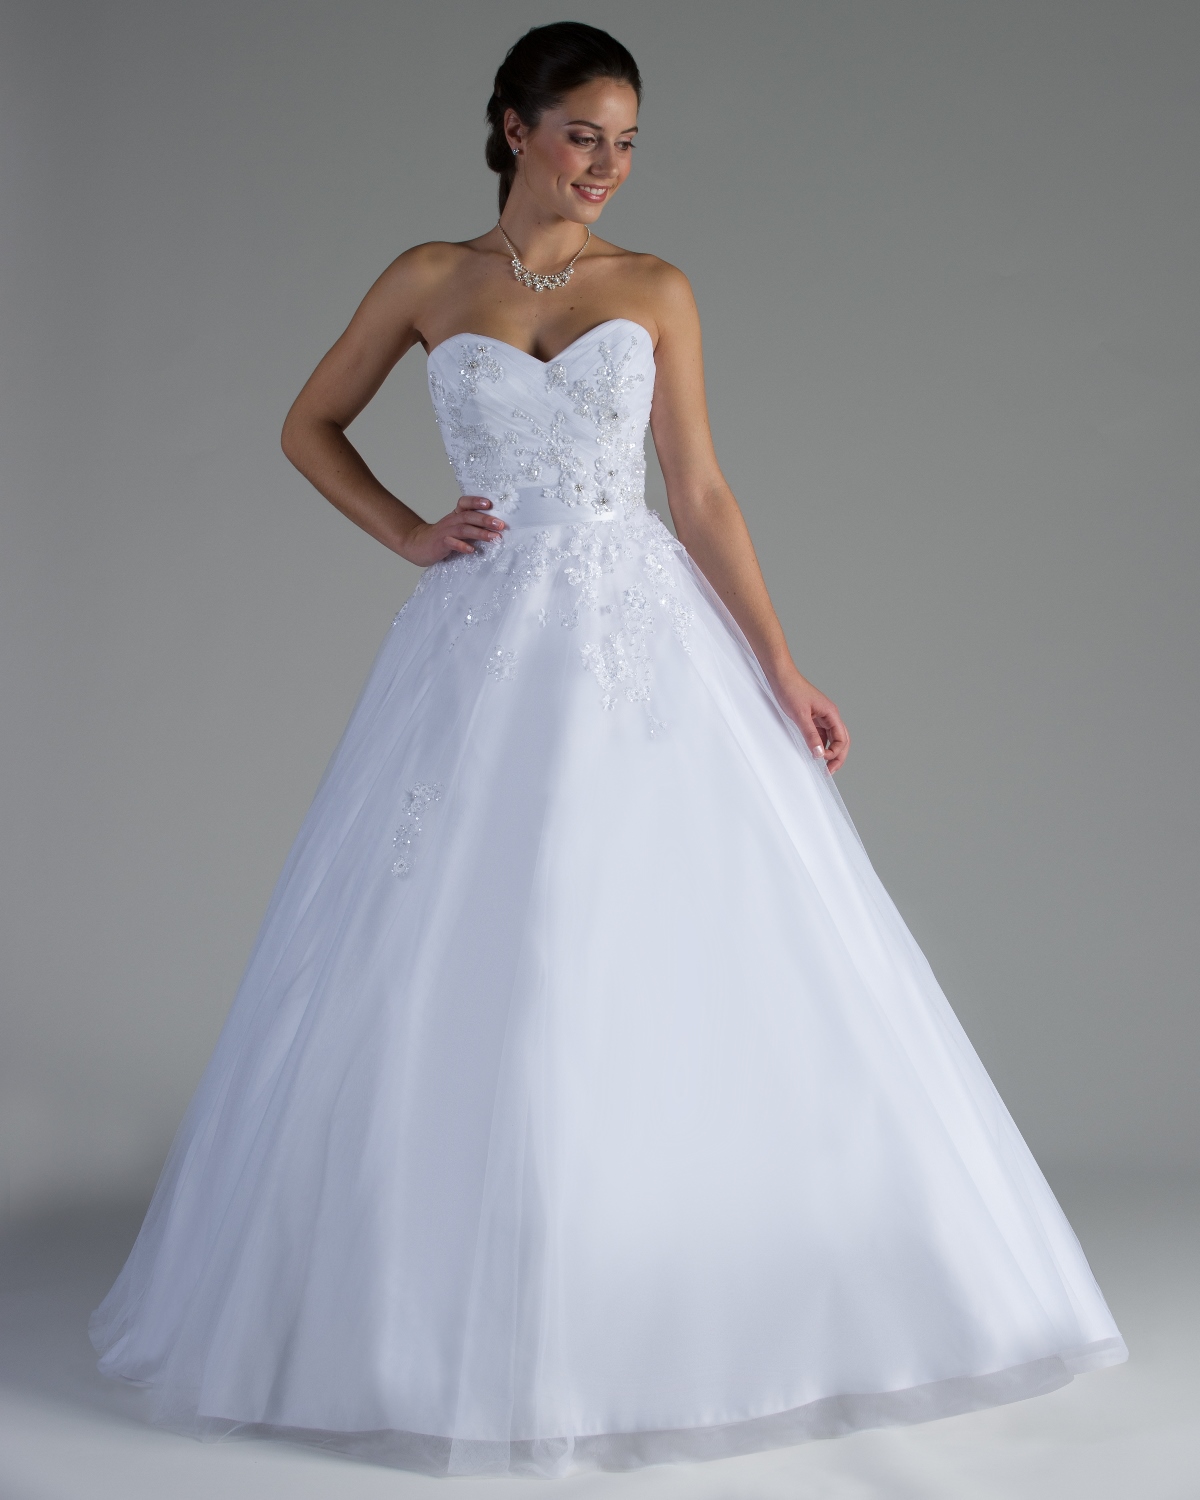 Wedding Dress - Bridalane - 209 - Shown in White tulle and lace ...